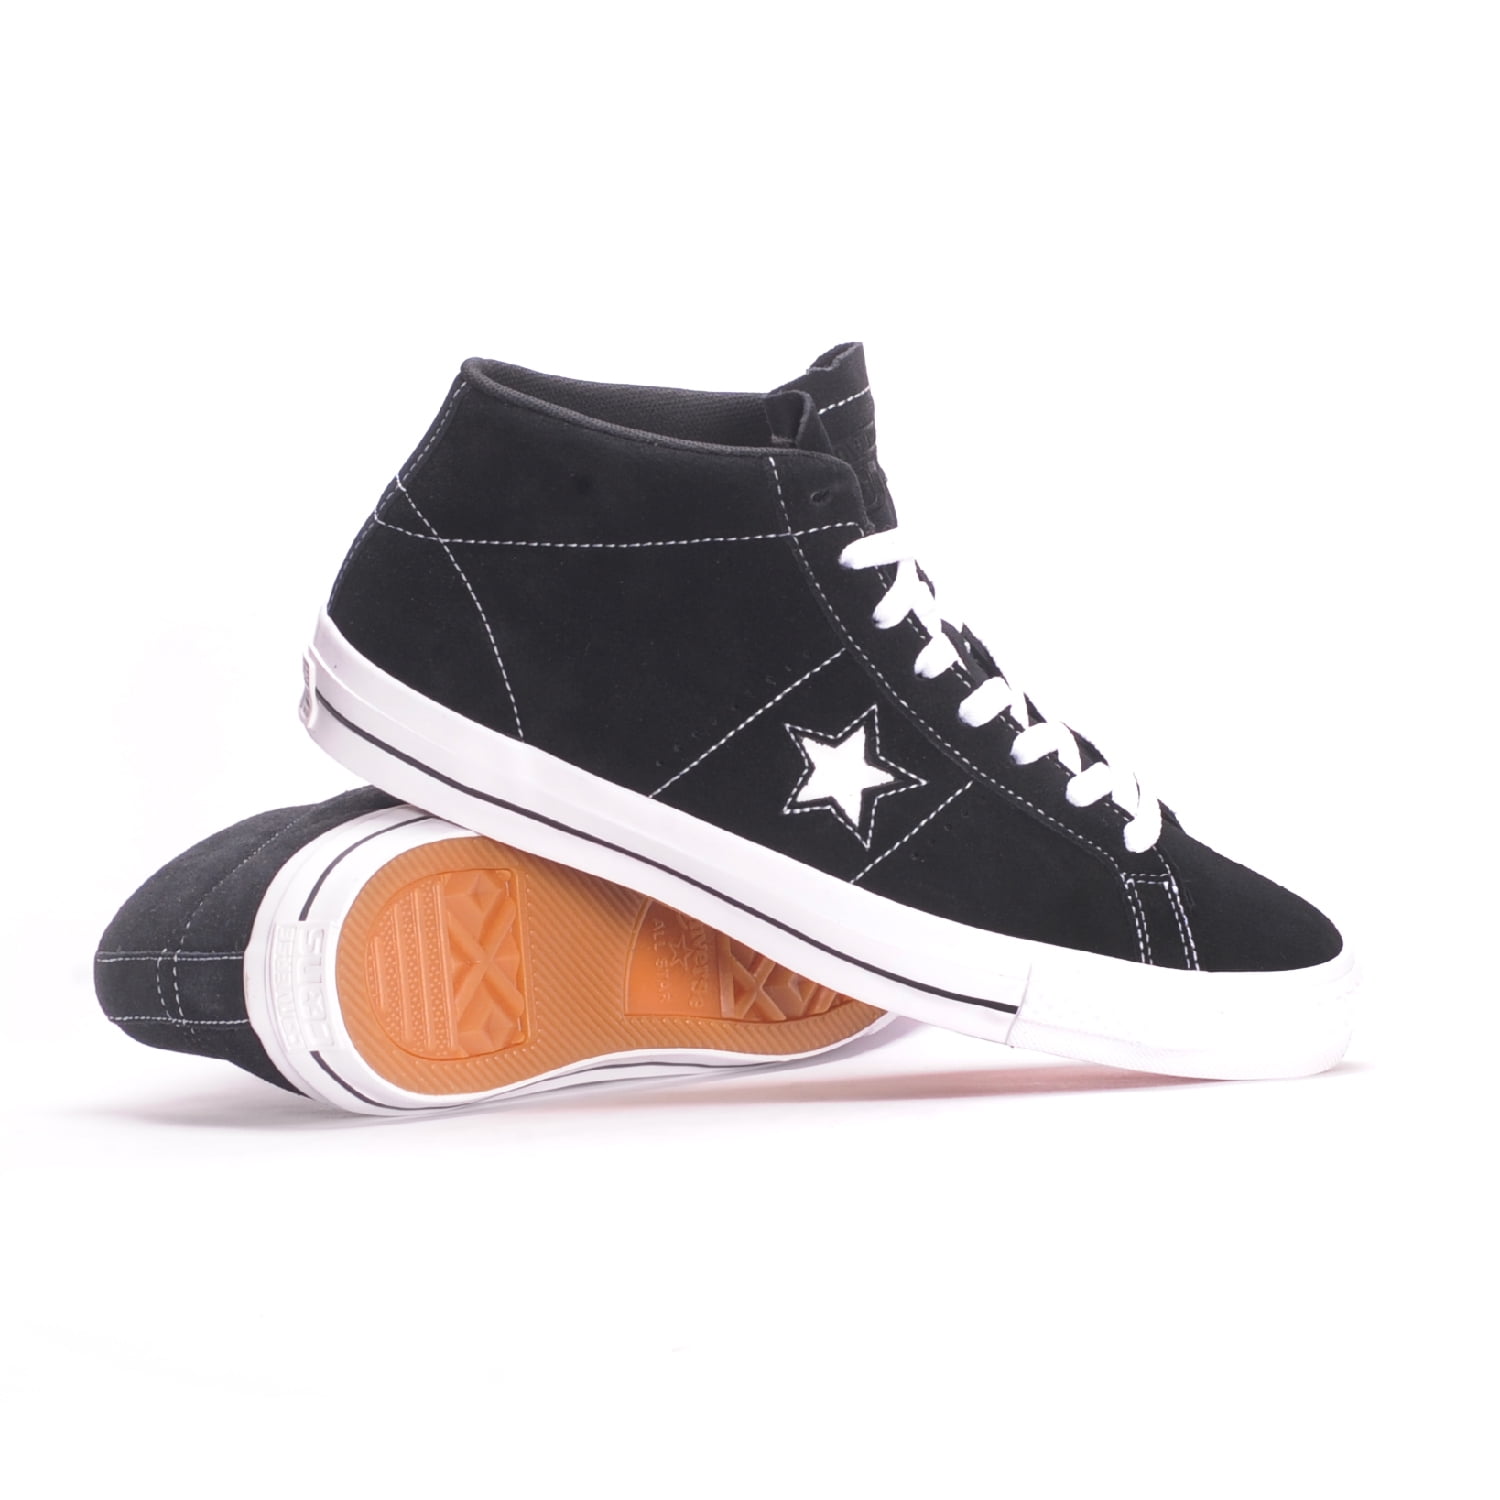 converse one star pro suede mid